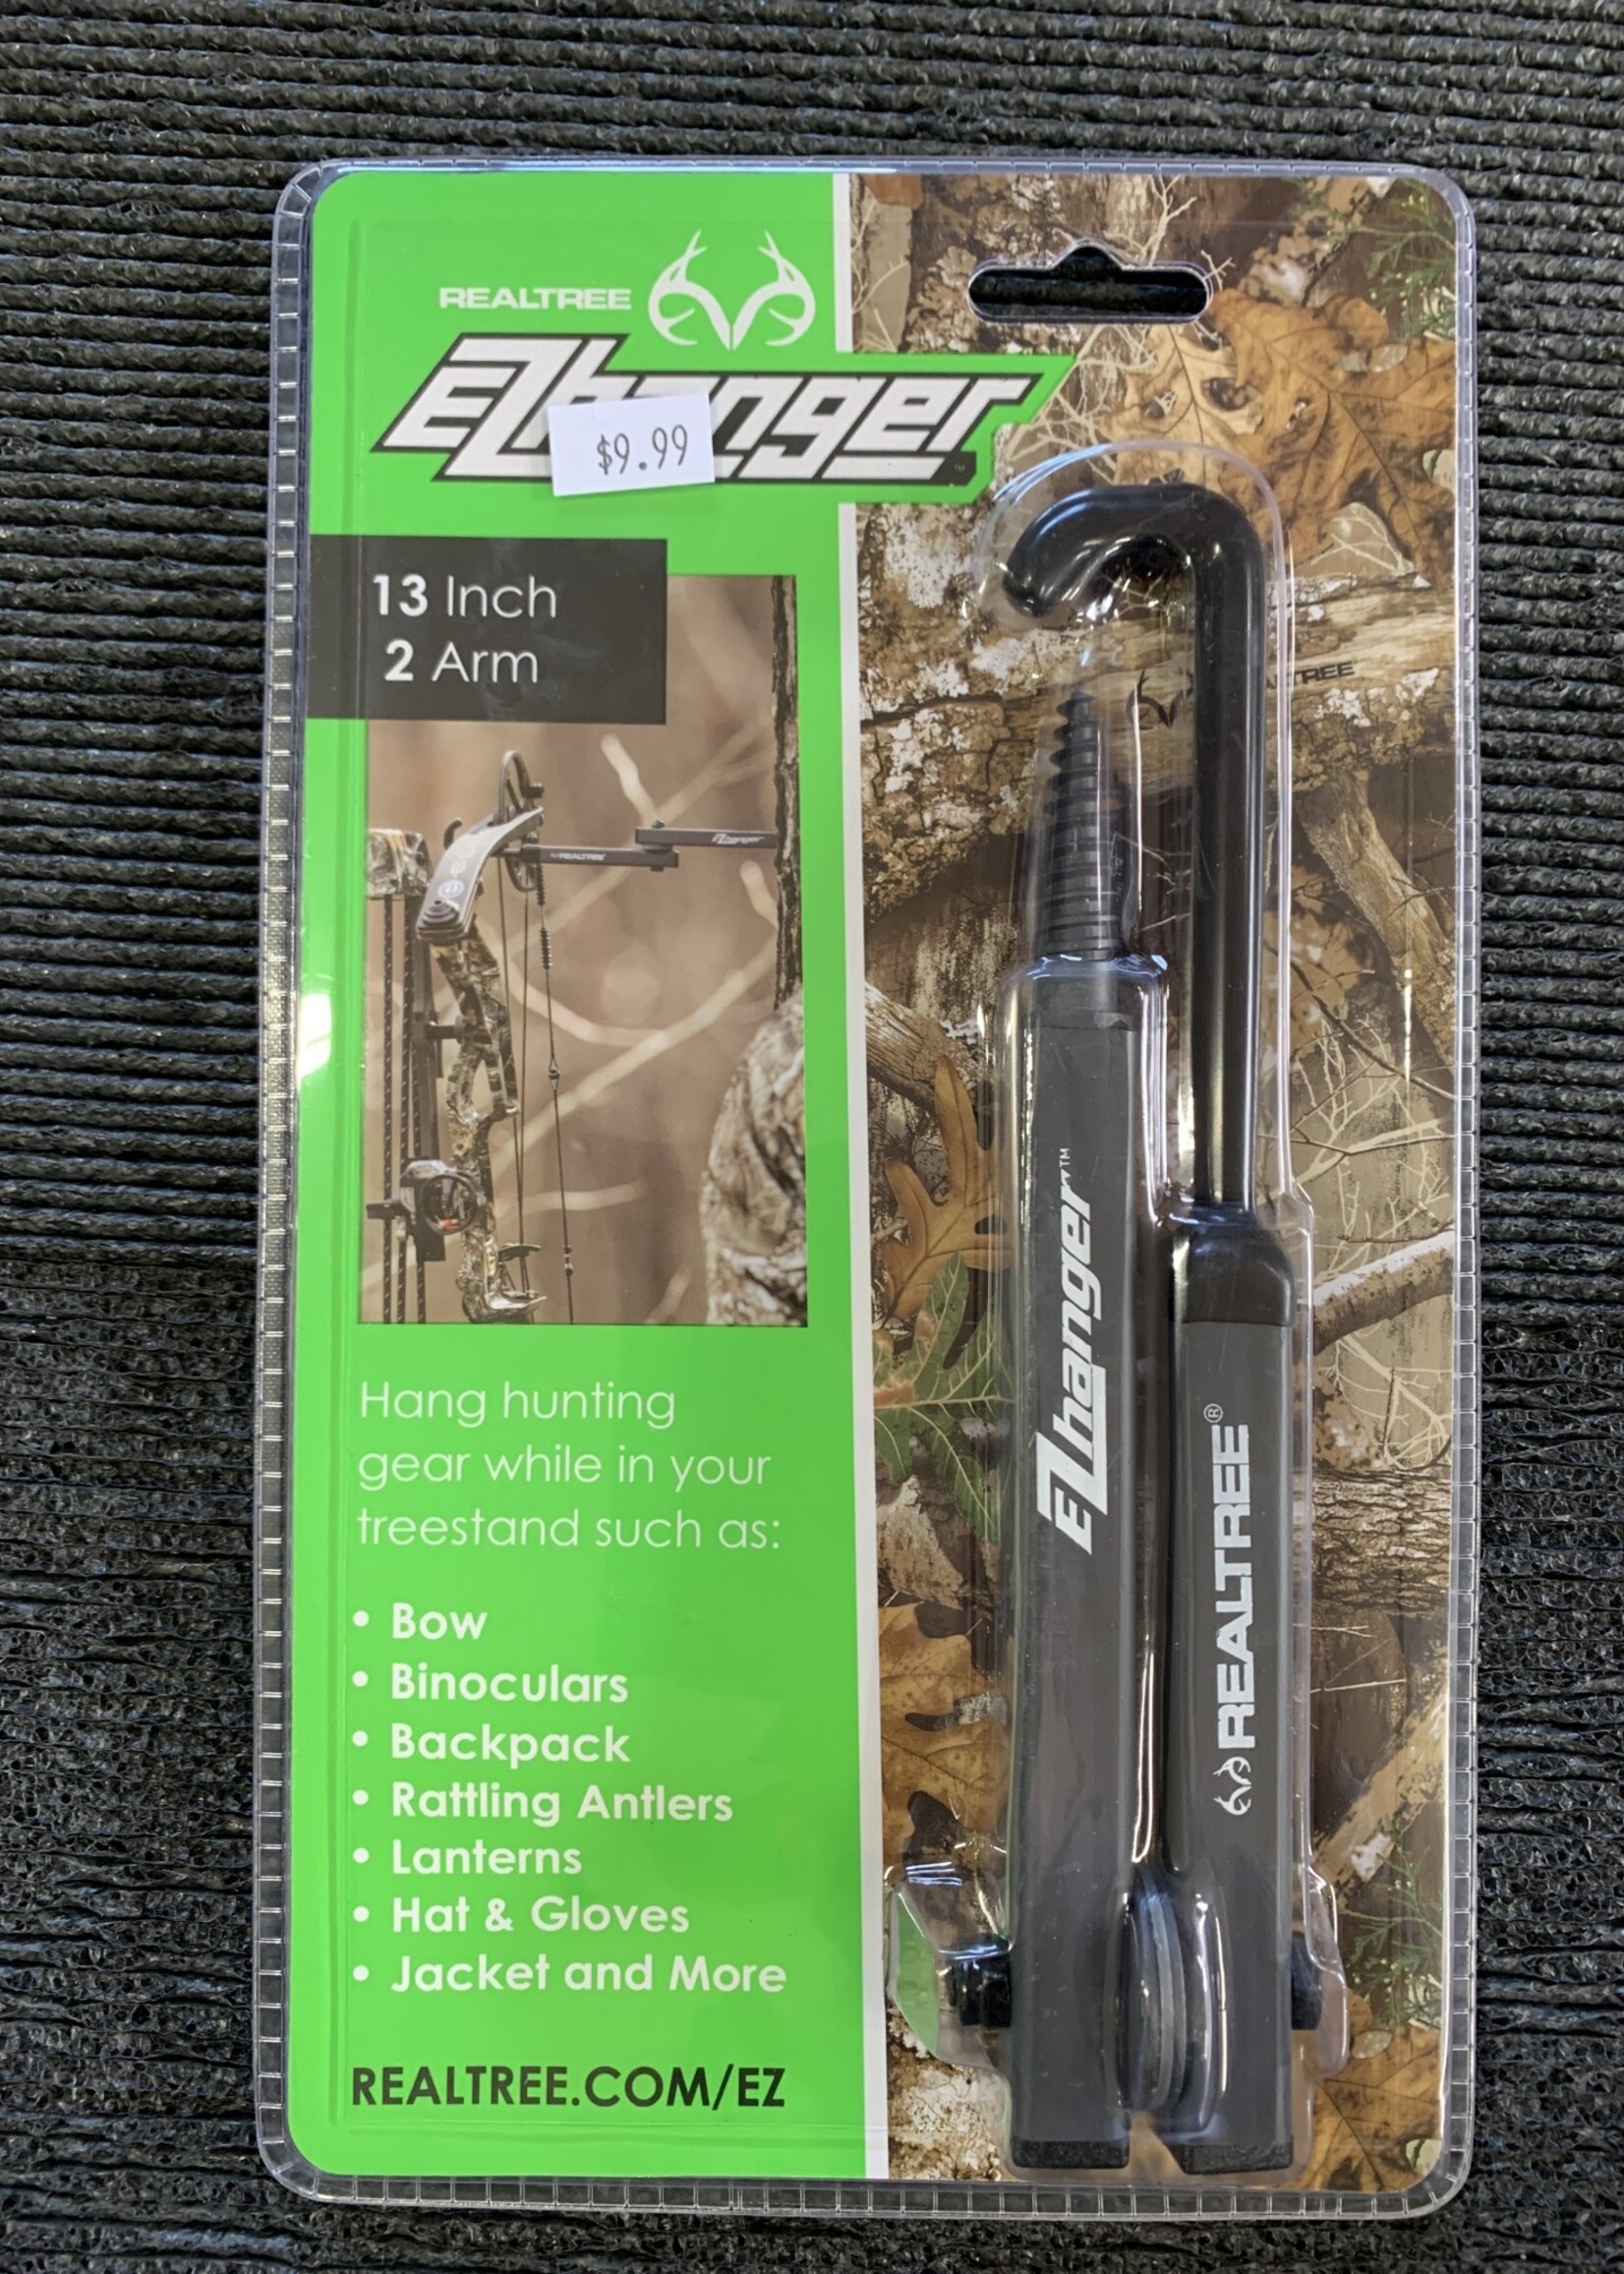 REALTREE OUTDOOR PRODUCTS REALTREE EZ HANGER 13 INCH